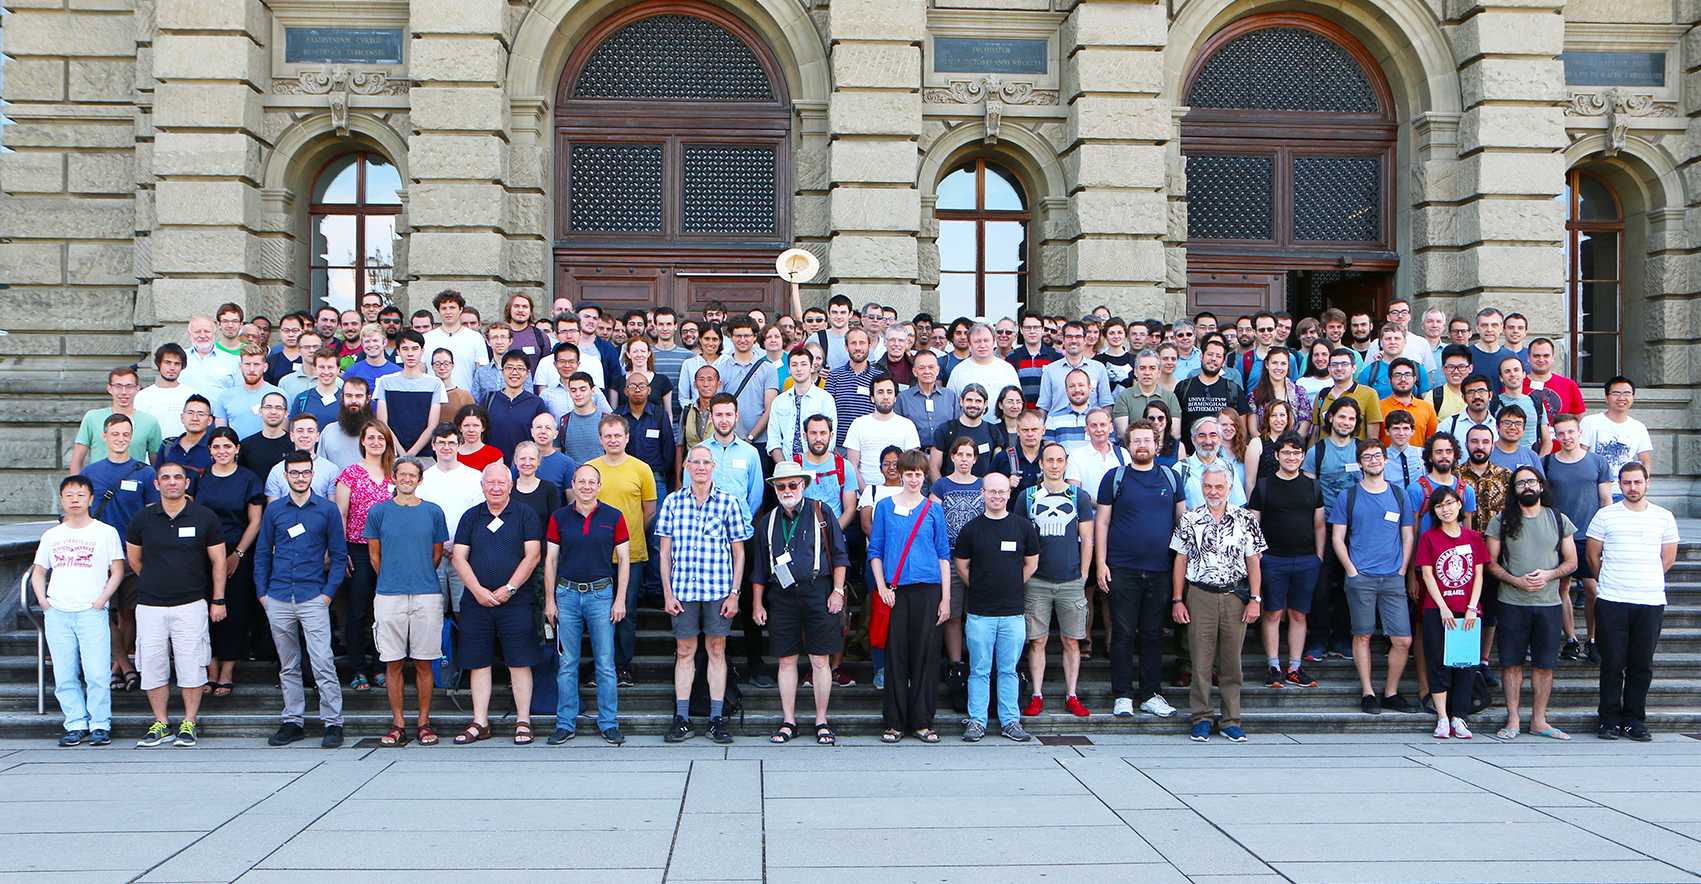 Enlarged view: RSA 2019 group photo